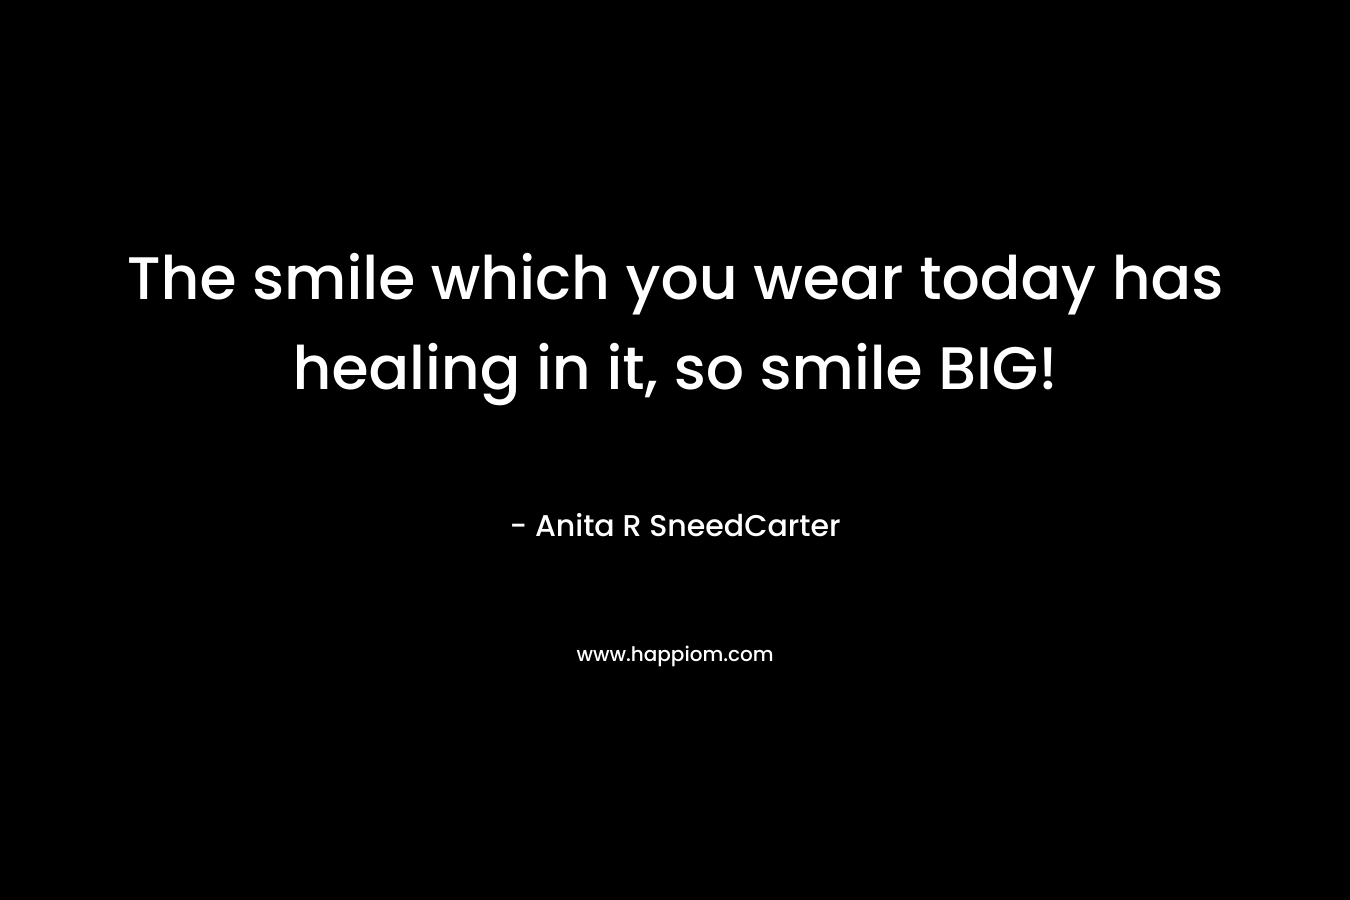 The smile which you wear today has healing in it, so smile BIG!